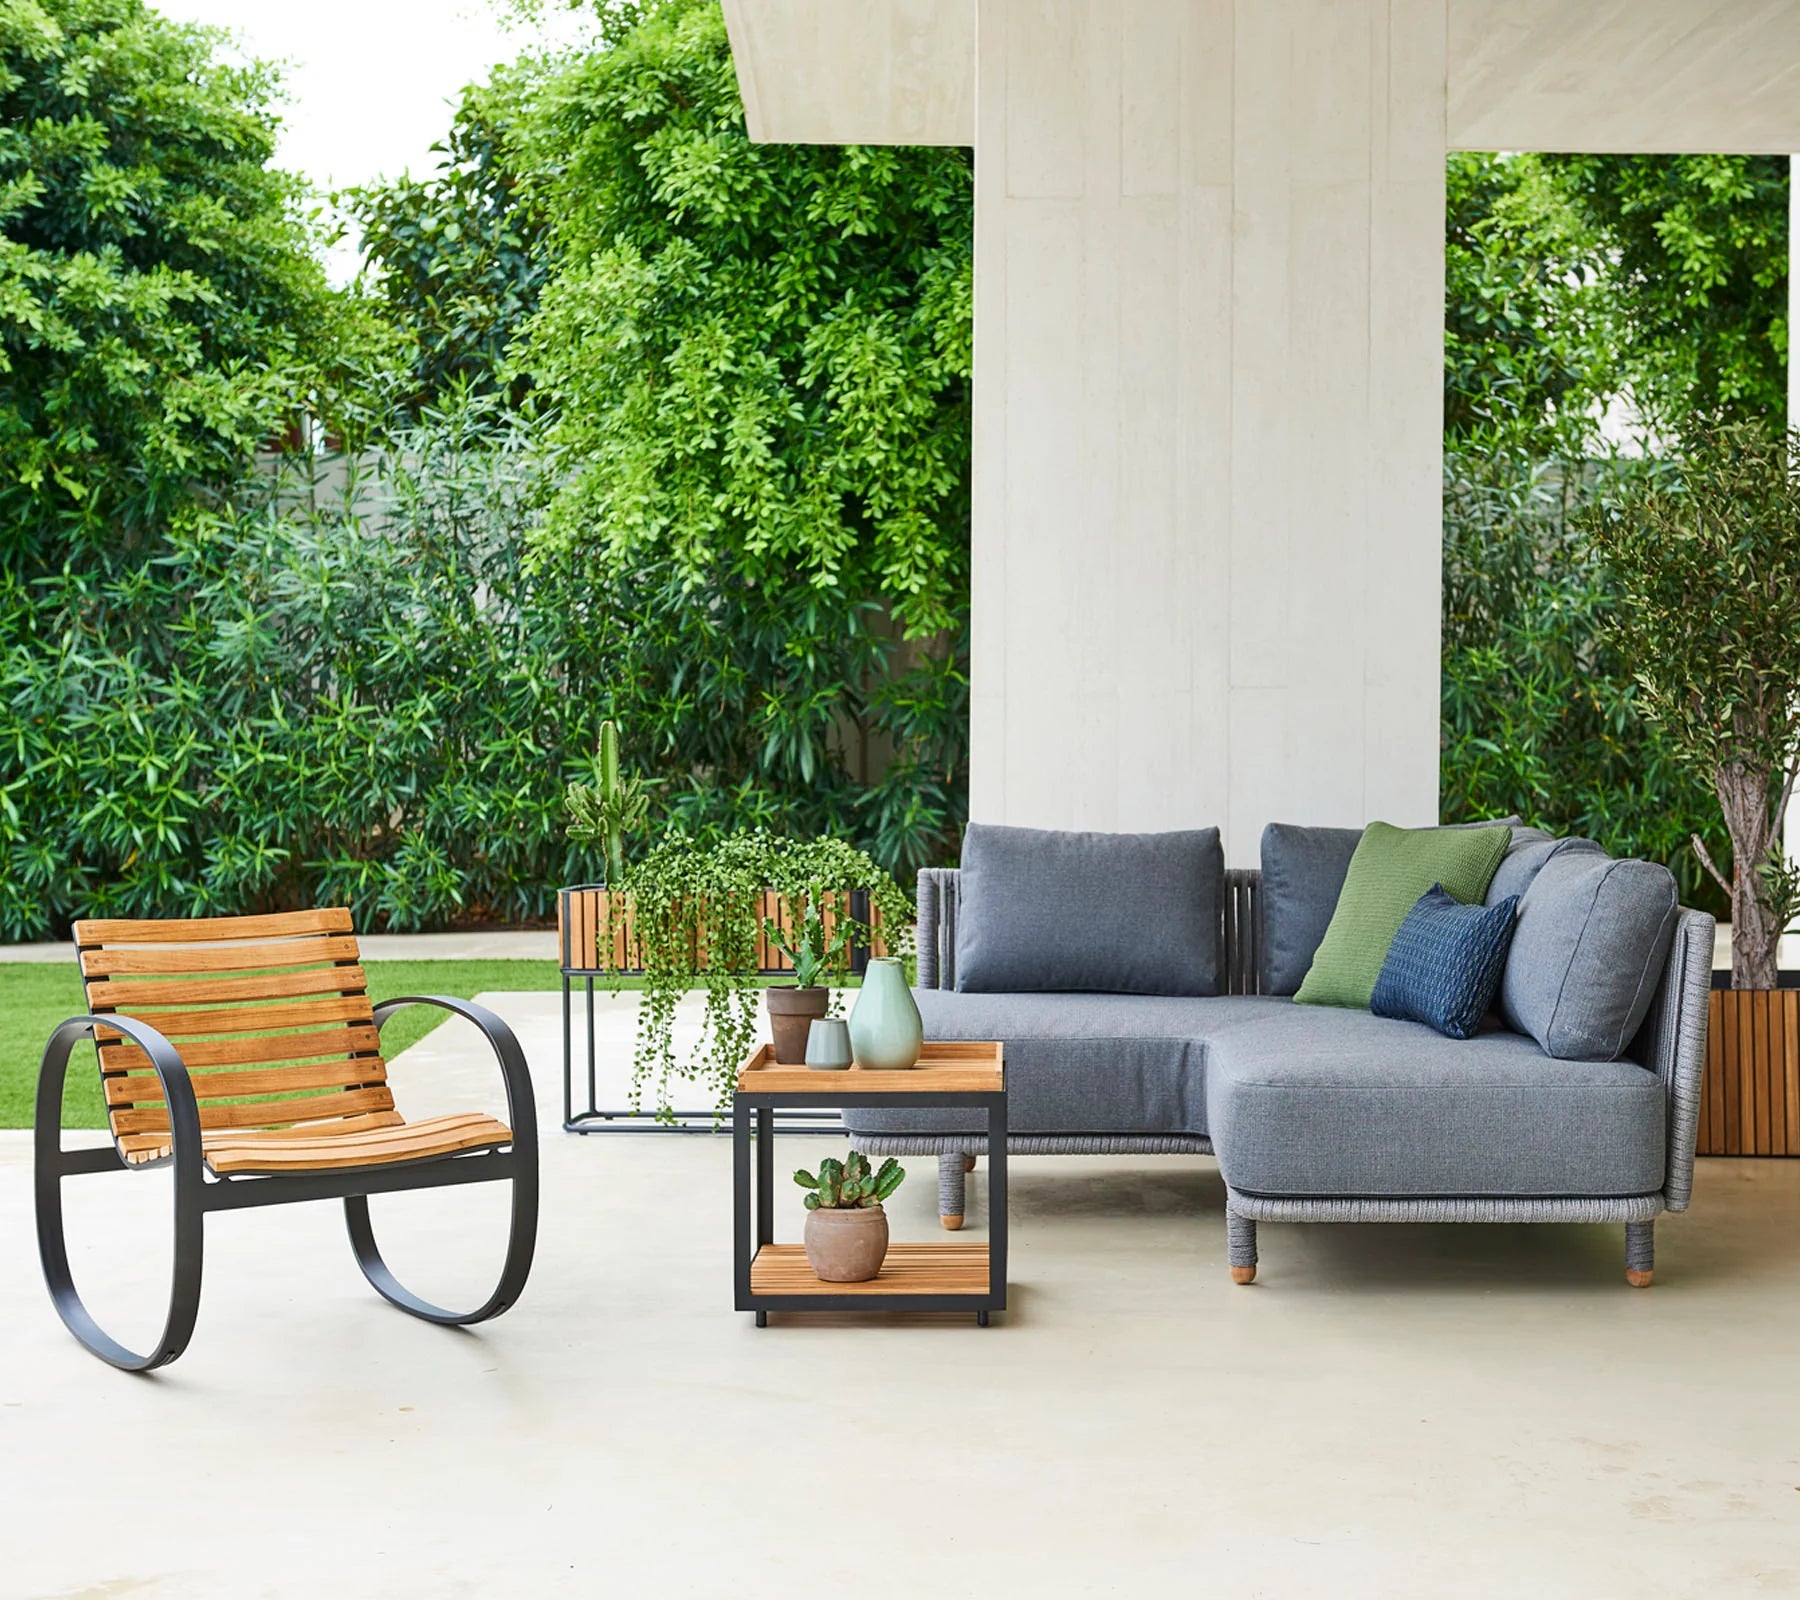 Boxhill's Parc teak outdoor rocking with teak square table and grey outdoor sectional sofa placed in patio